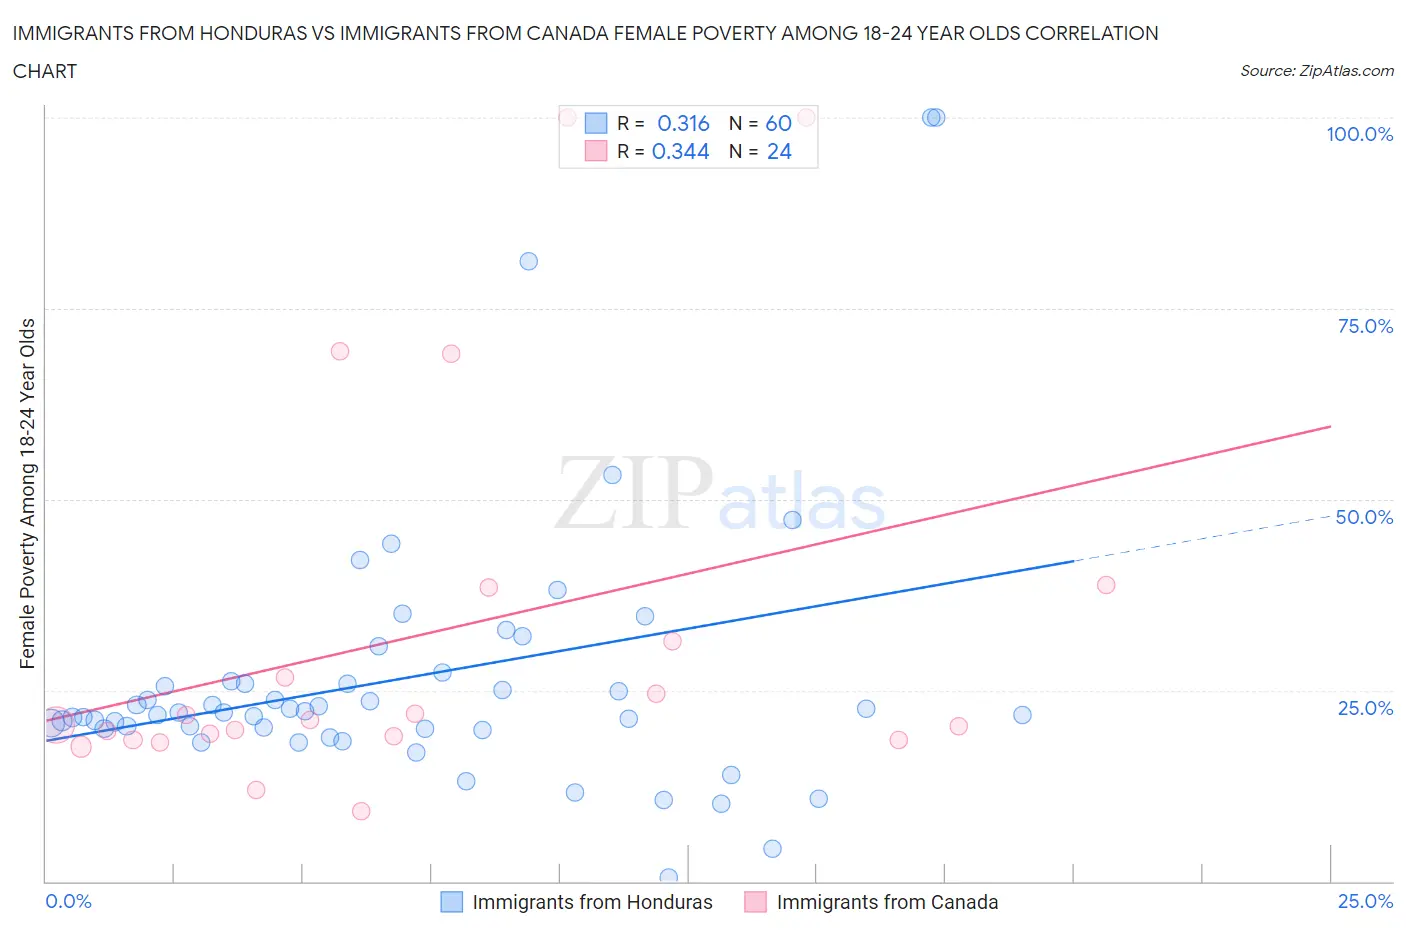 Immigrants from Honduras vs Immigrants from Canada Female Poverty Among 18-24 Year Olds